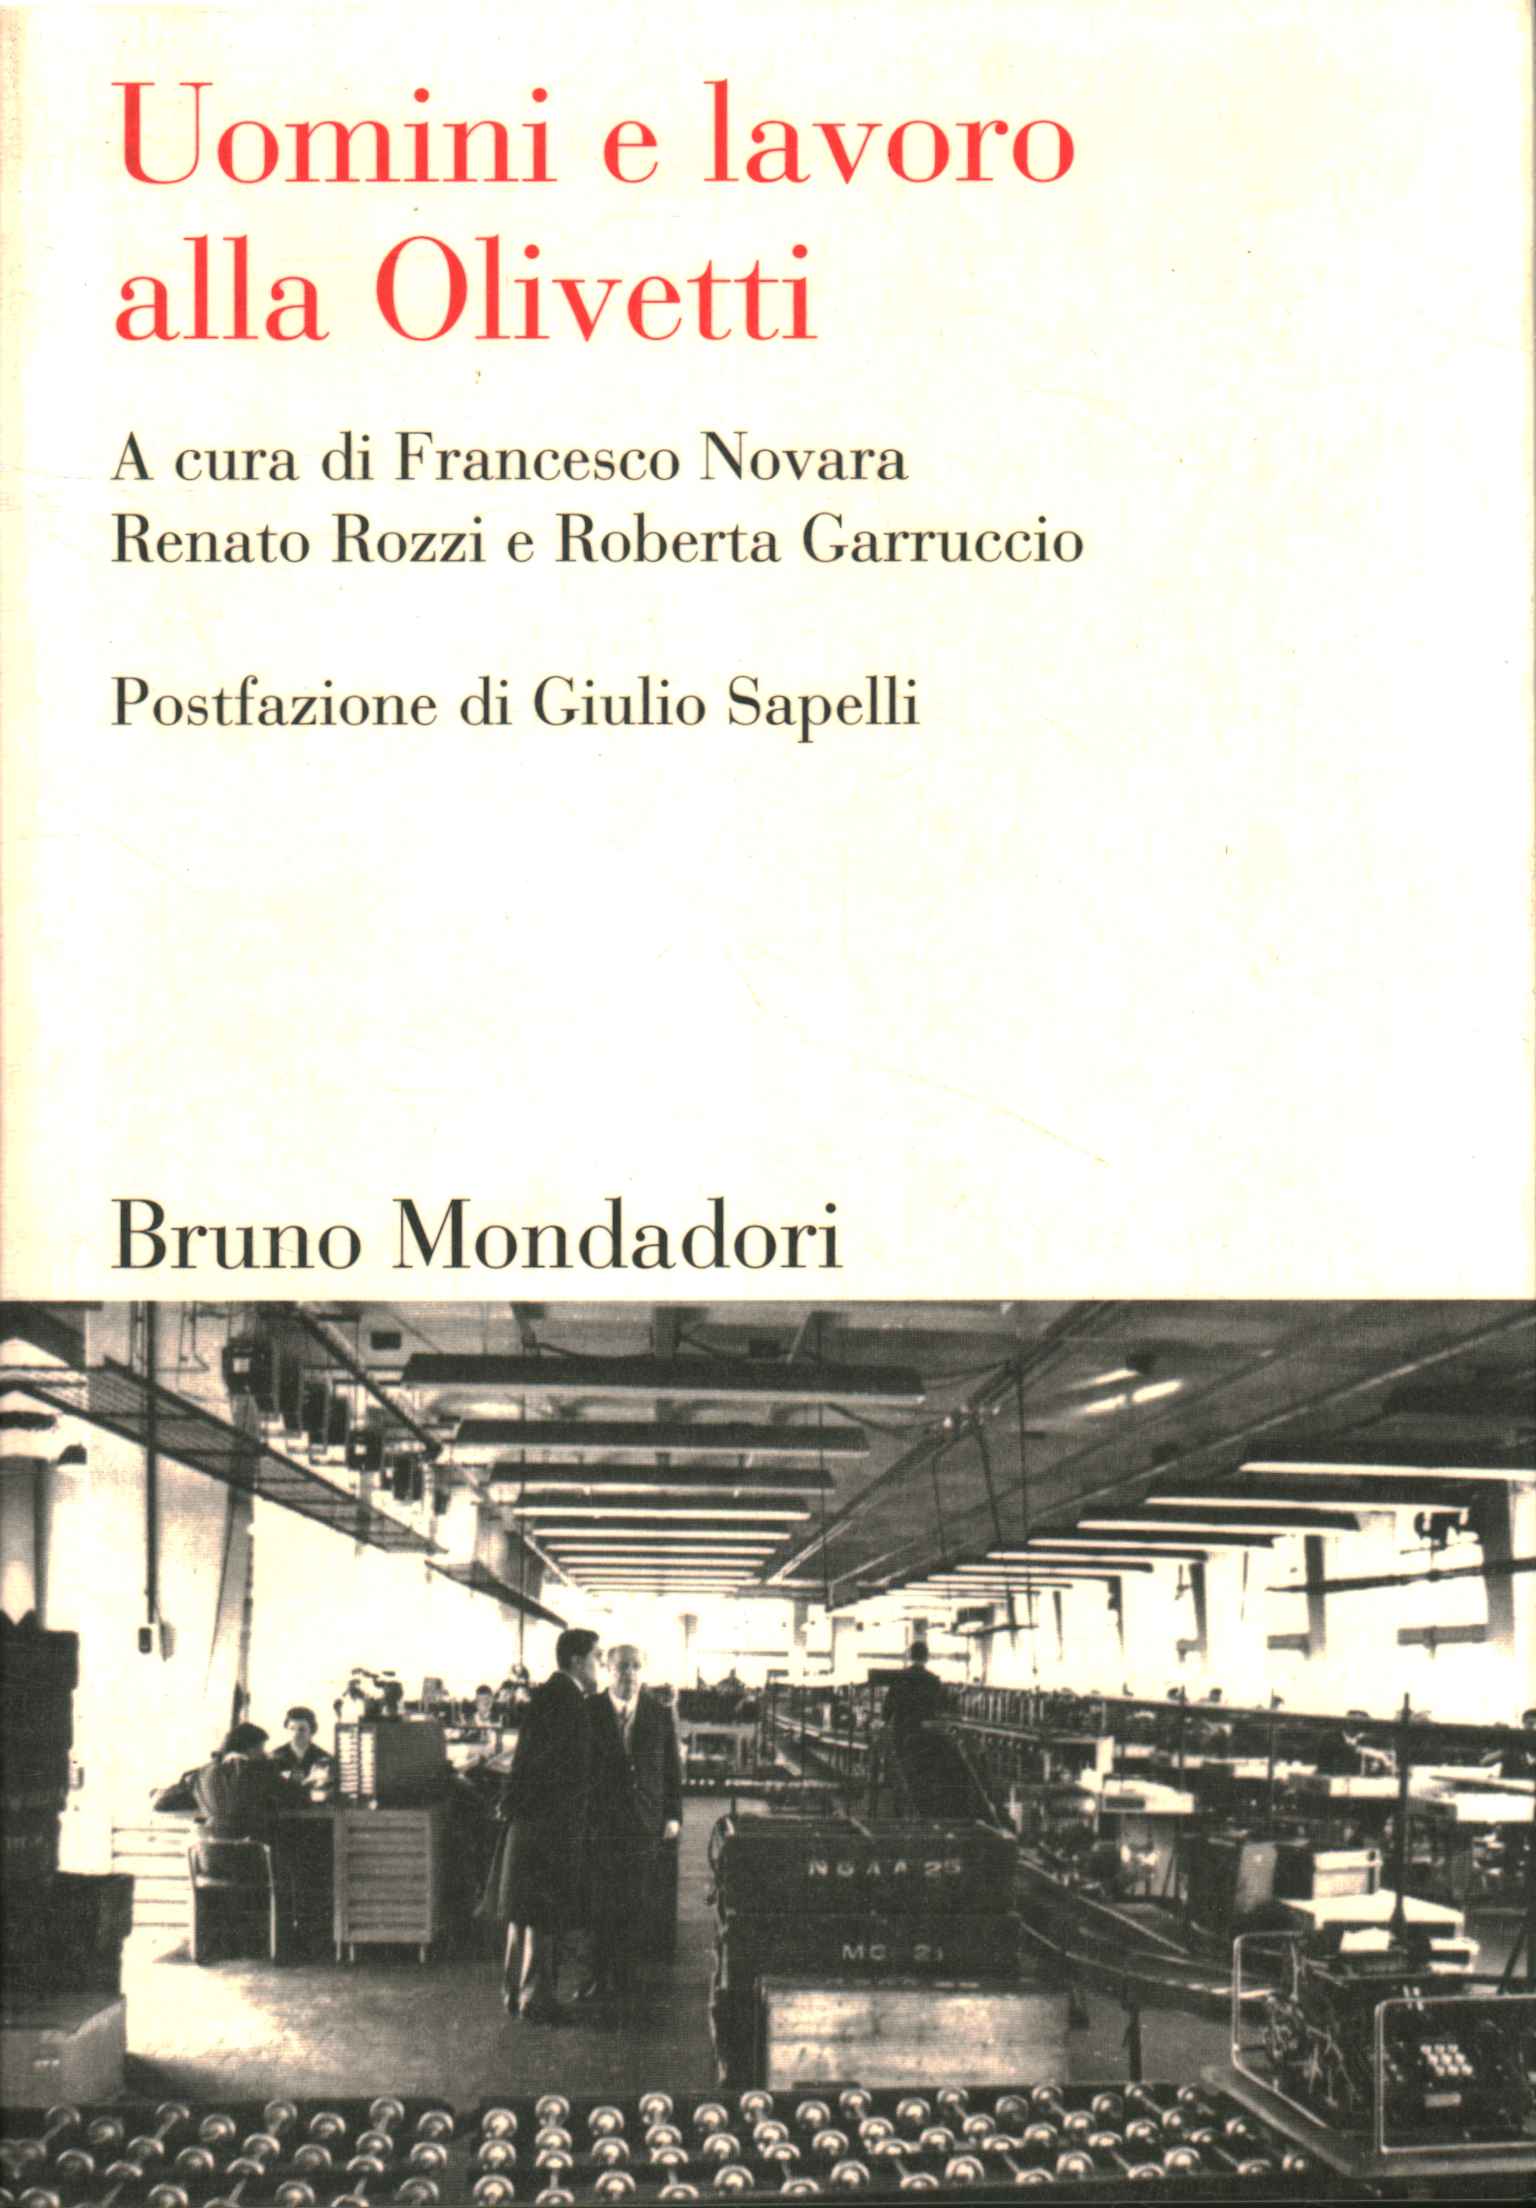 Men and work at Olivetti